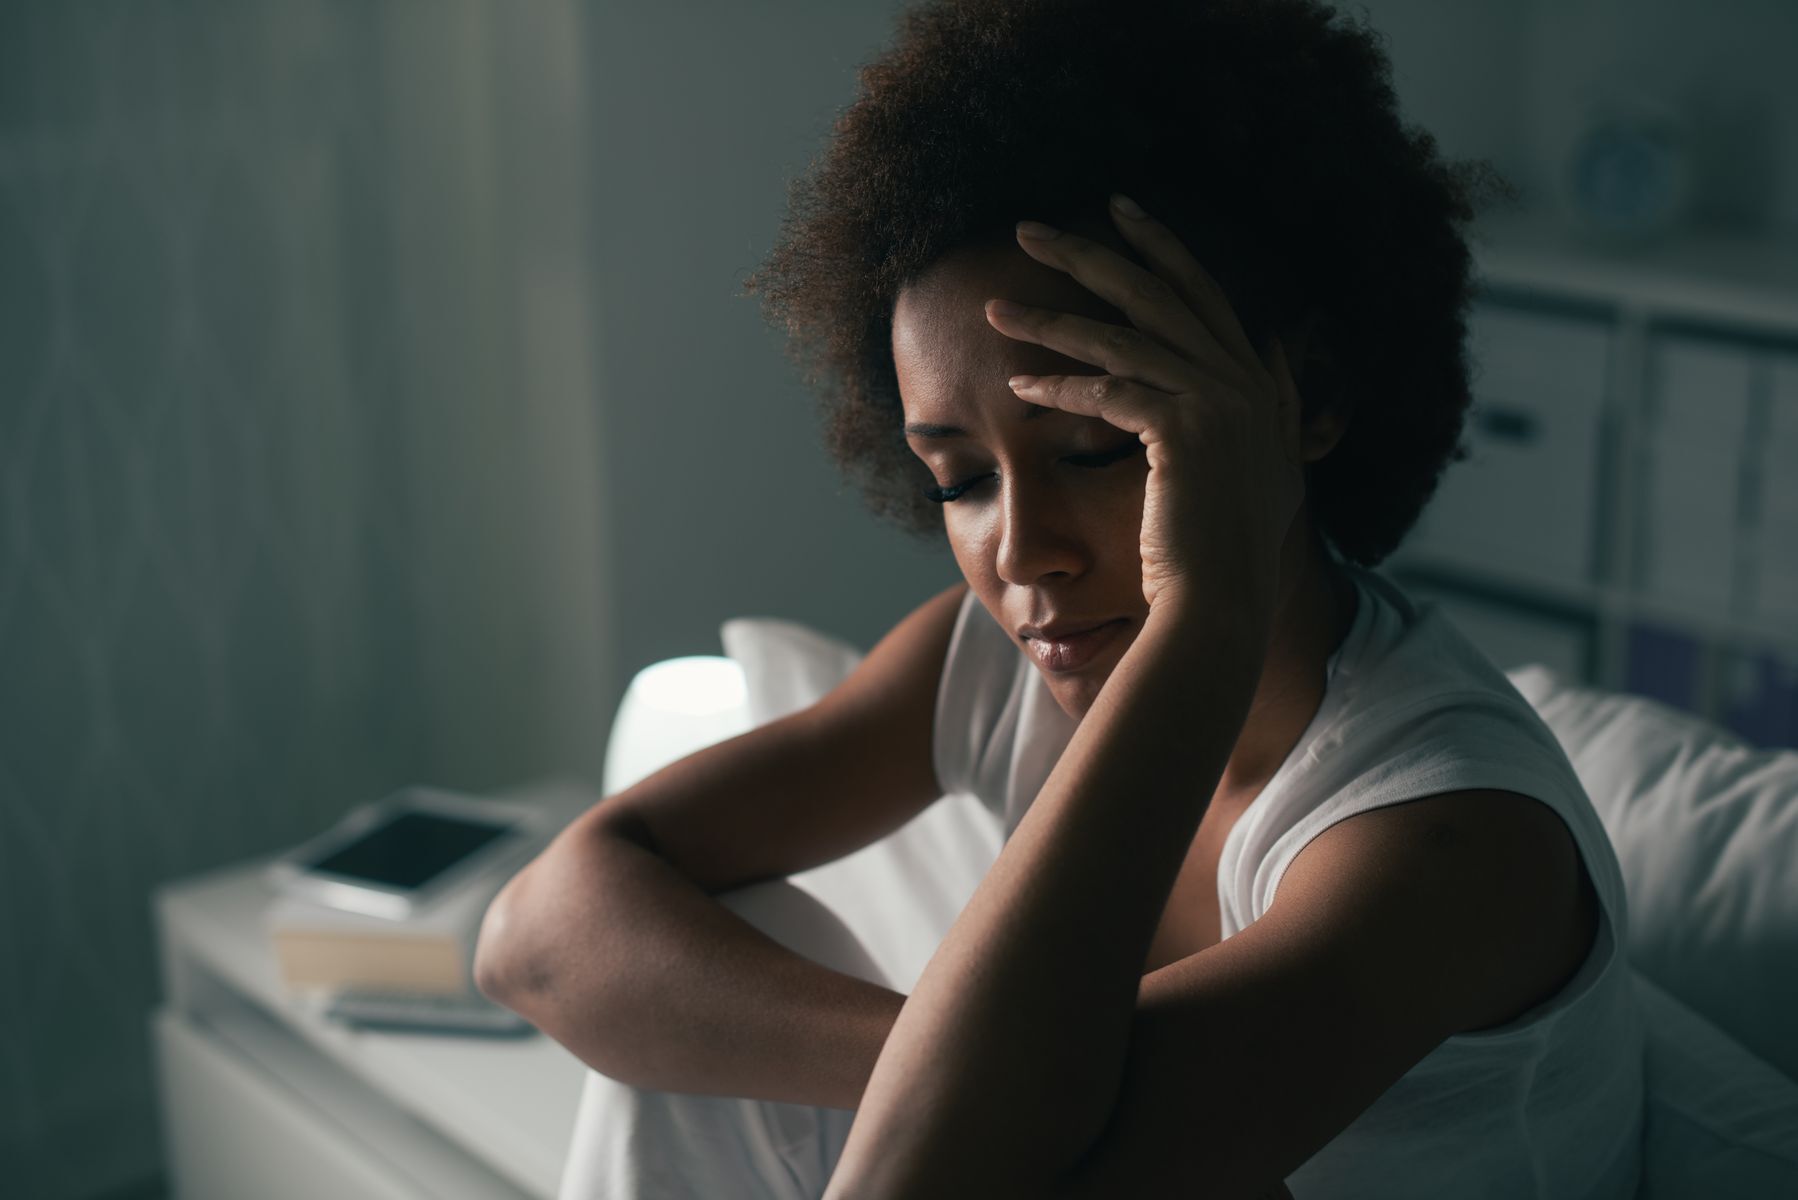 <p>Finding it hard to nod off at night? While there may be a variety of reasons for your sleep problems, one cause could be an overactive thyroid, according to the <a href="https://www.sleepfoundation.org/articles/your-thyroid-blame-your-sleep-issues">Sleep Foundation</a>. Your sleep can be disrupted by all manner of issues, including light, your diet, and temperature. However, if you struggle to sleep each night, get it checked out.</p>